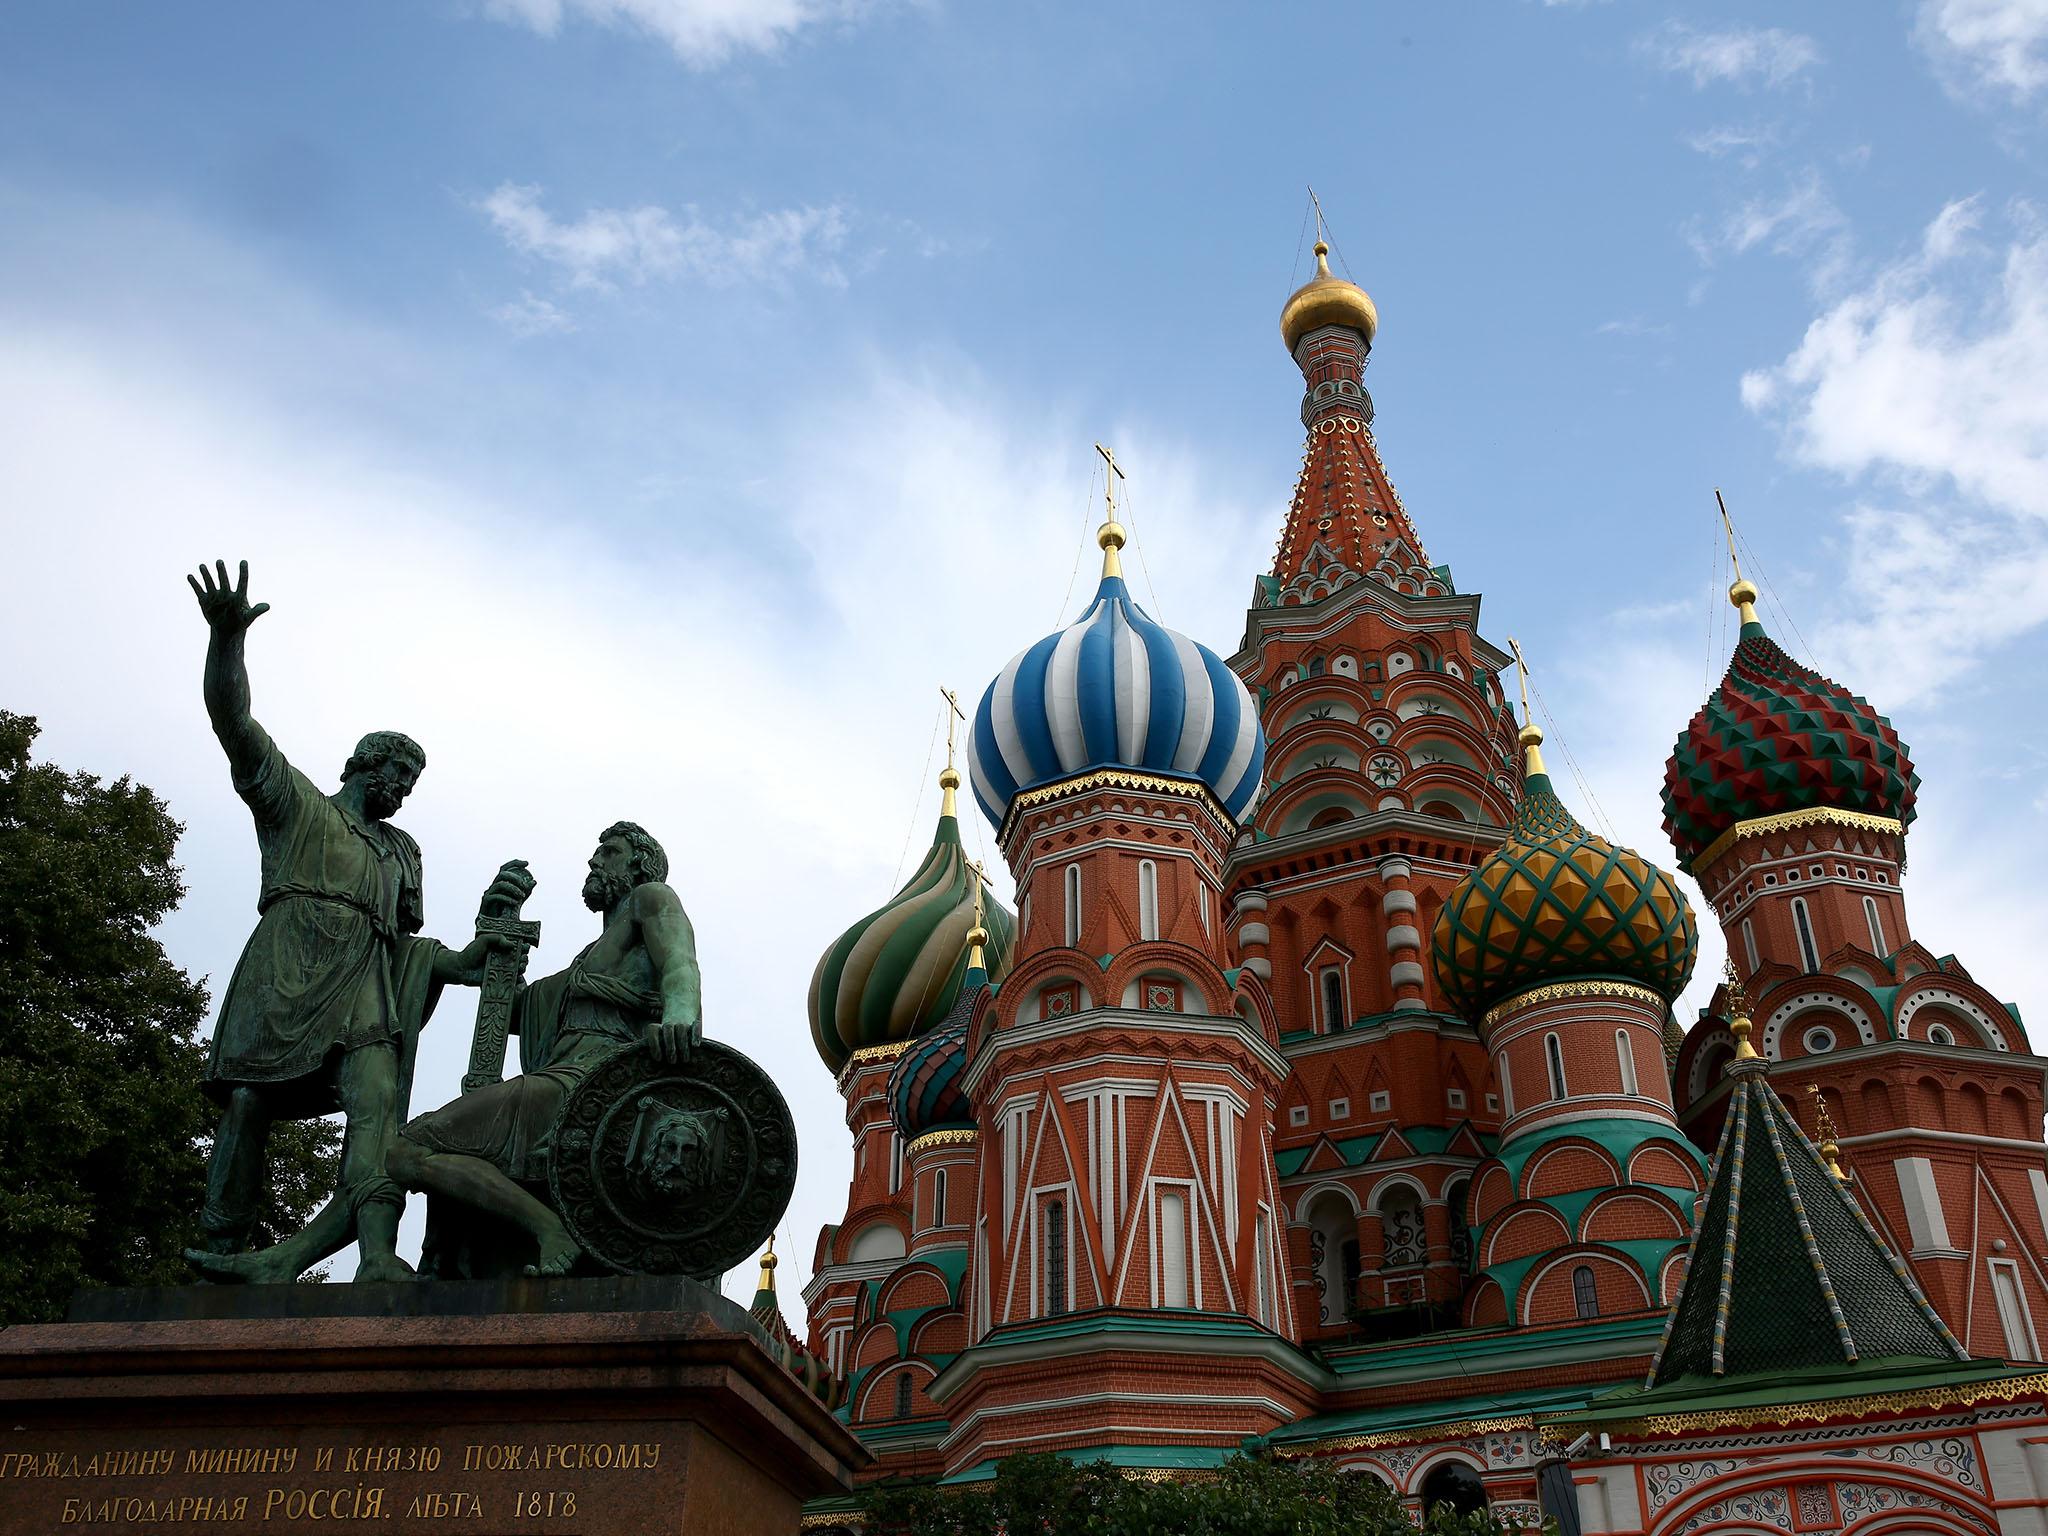 A general view is seen of St Basil's Cathedral in Red Square ahead of the IAAF World Championships on August 6, 2013 in Moscow, Russia